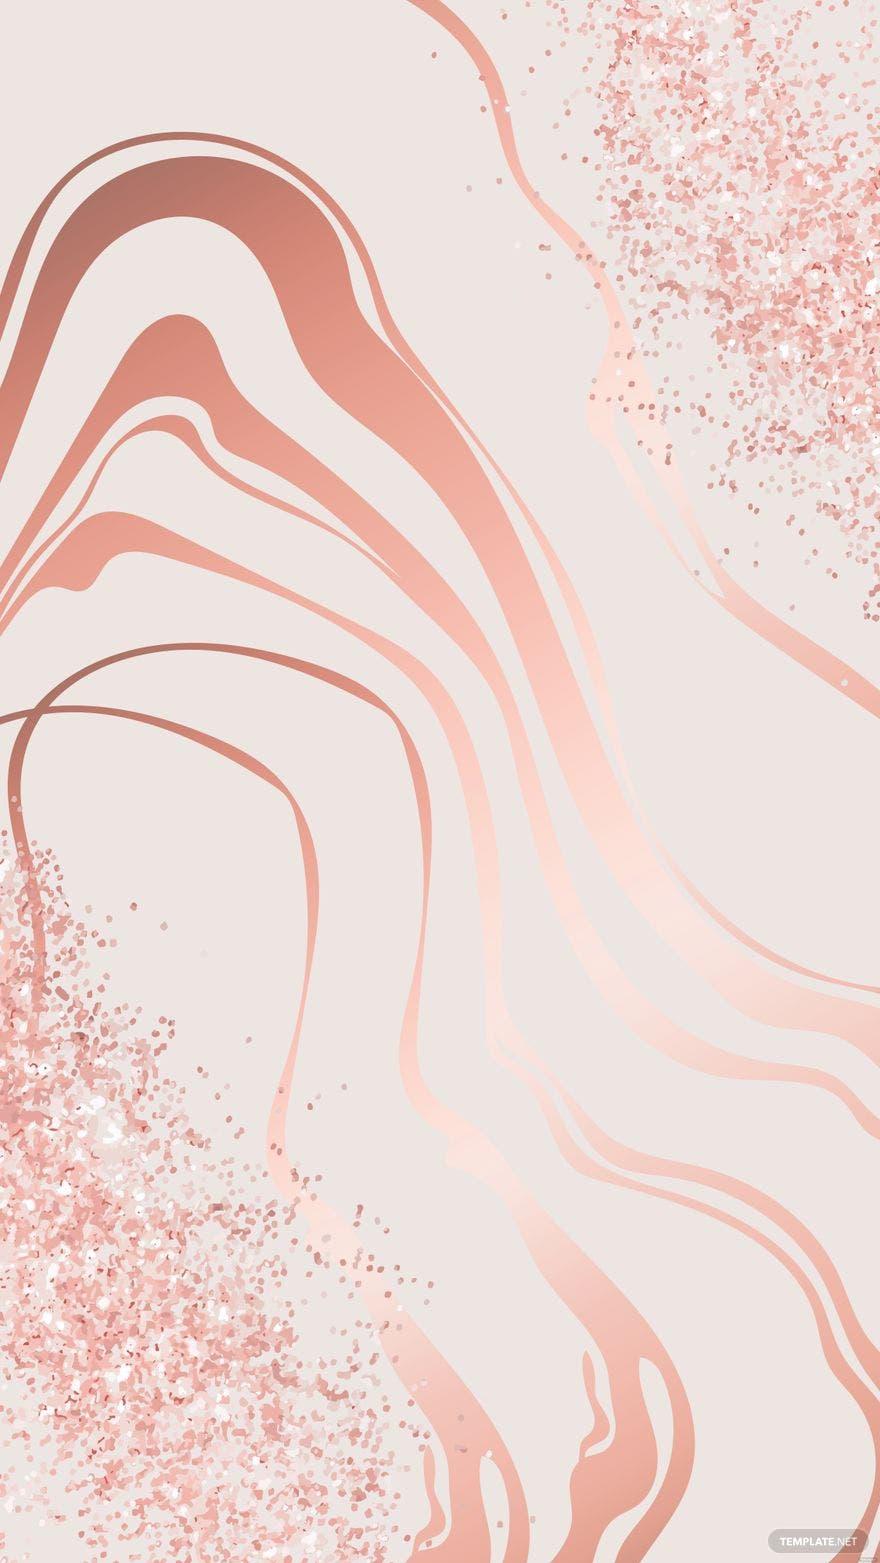 Rose Gold Glitter Texture Pink Red Sparkling Shiny Wrapping Paper Background  For Christmas Holiday Seasonal Wallpaper Decoration Greeting And Wedding  Invitation Card Design Element Stock Photo  Download Image Now  iStock